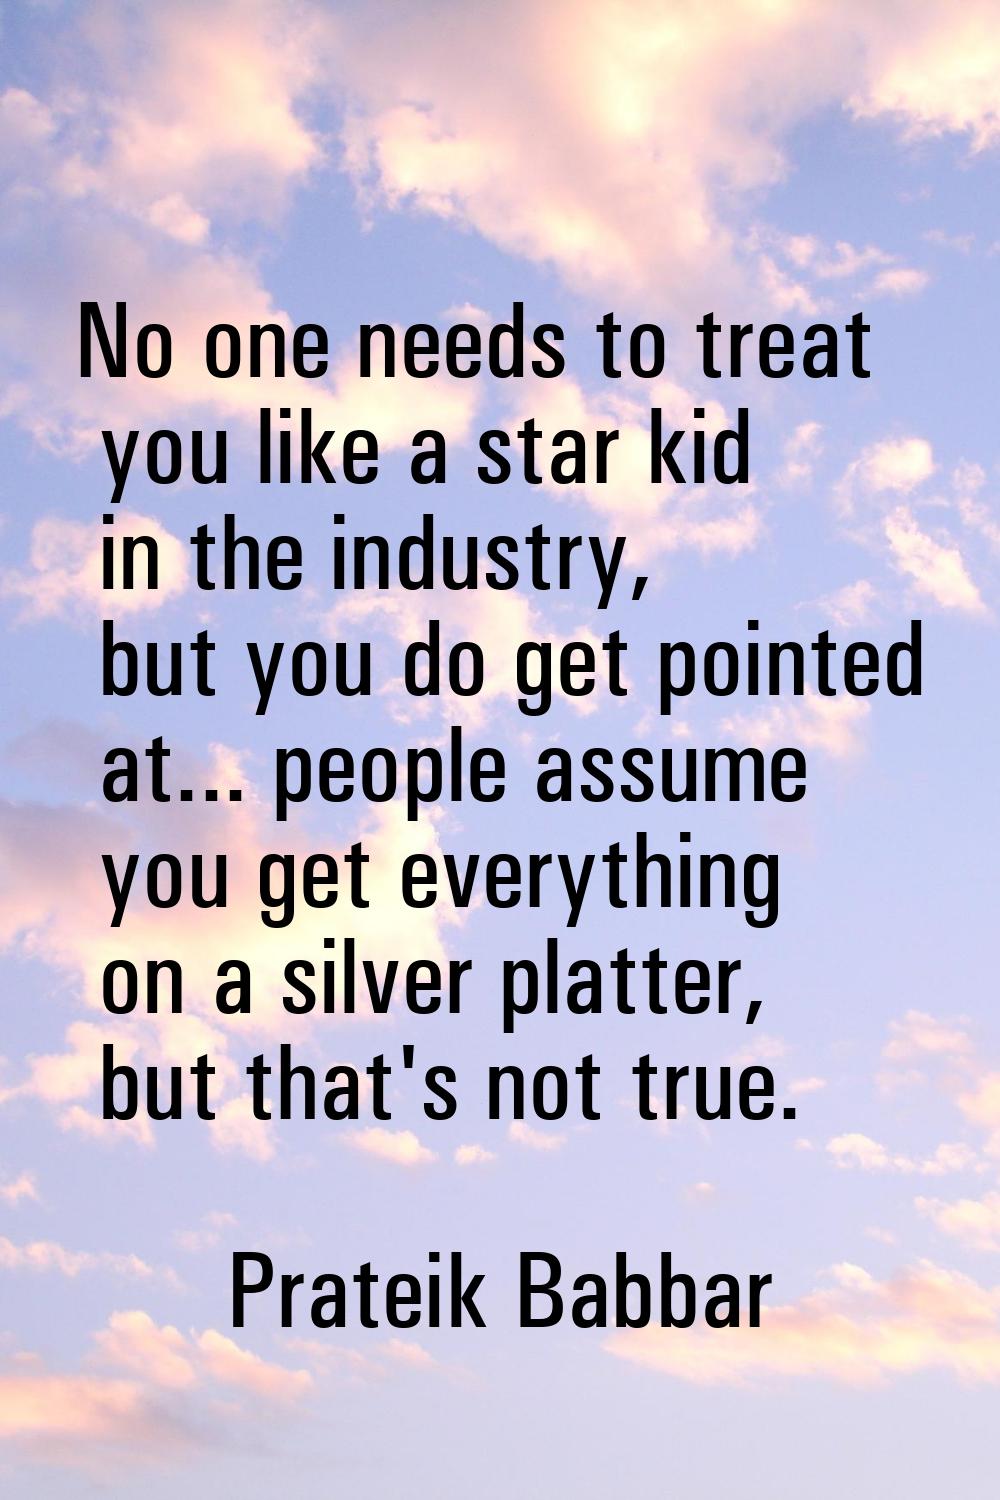 No one needs to treat you like a star kid in the industry, but you do get pointed at... people assu